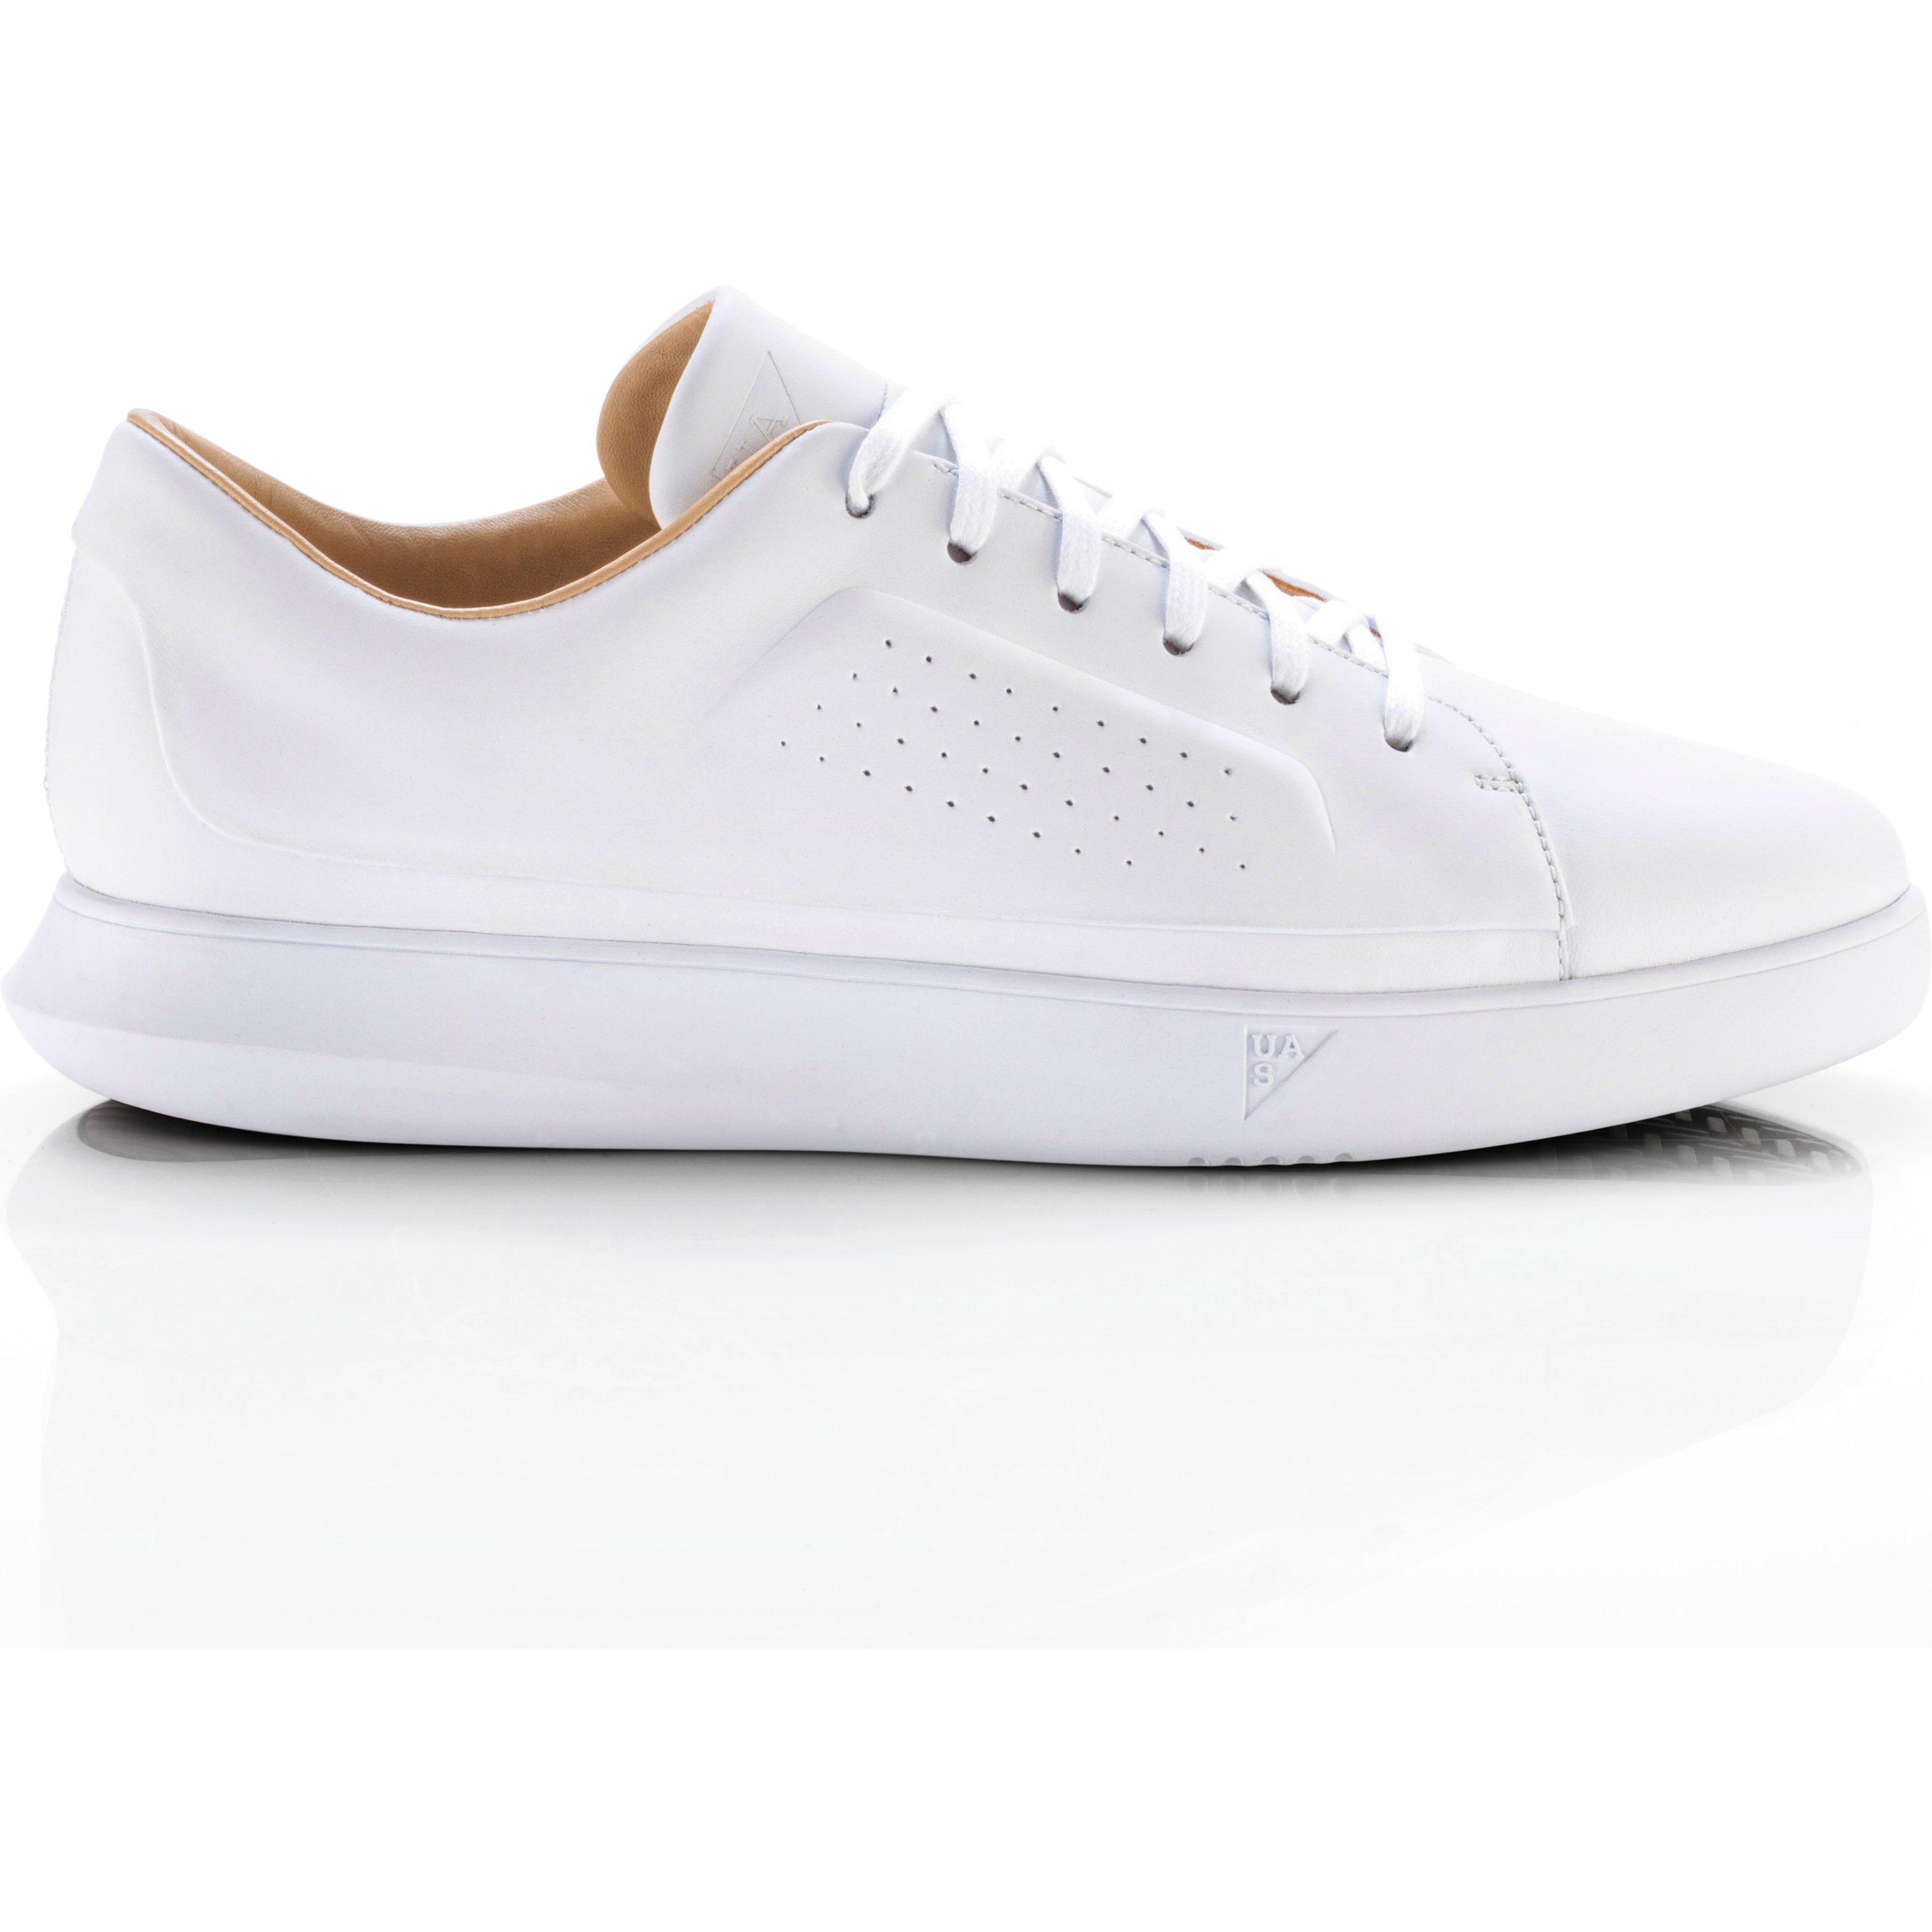 mens white under armour shoes Online 